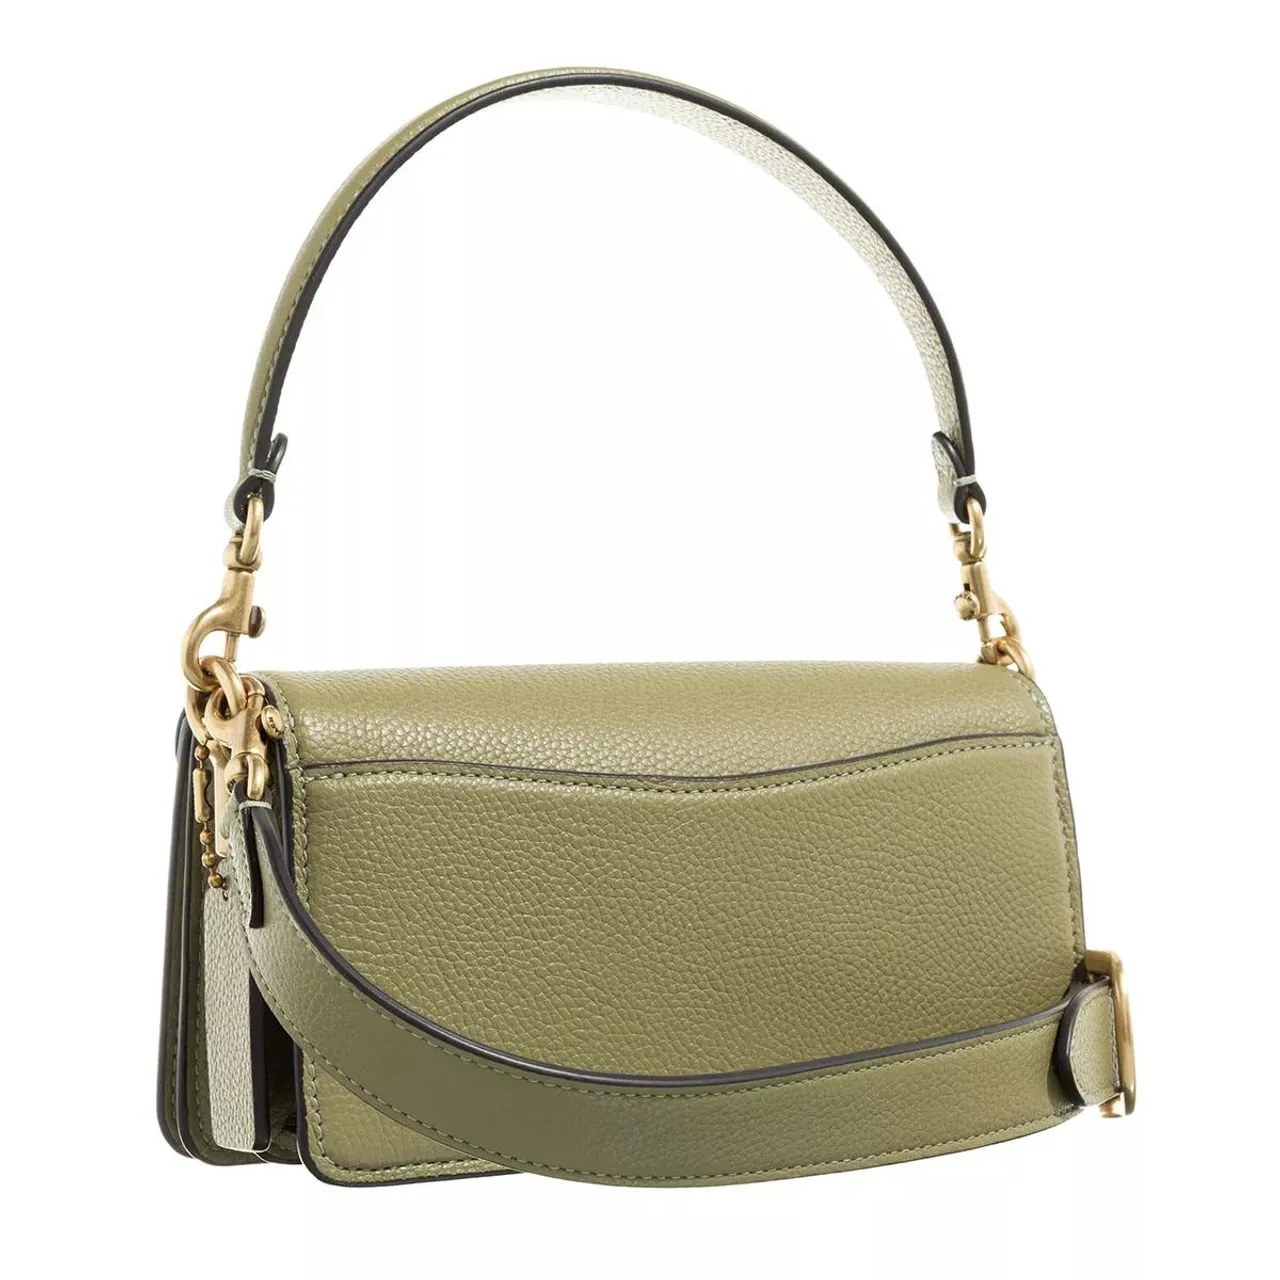 Coach Pochettes - Polished Pebble Leather Tabby Shoulder Bag - green - Pochettes for ladies